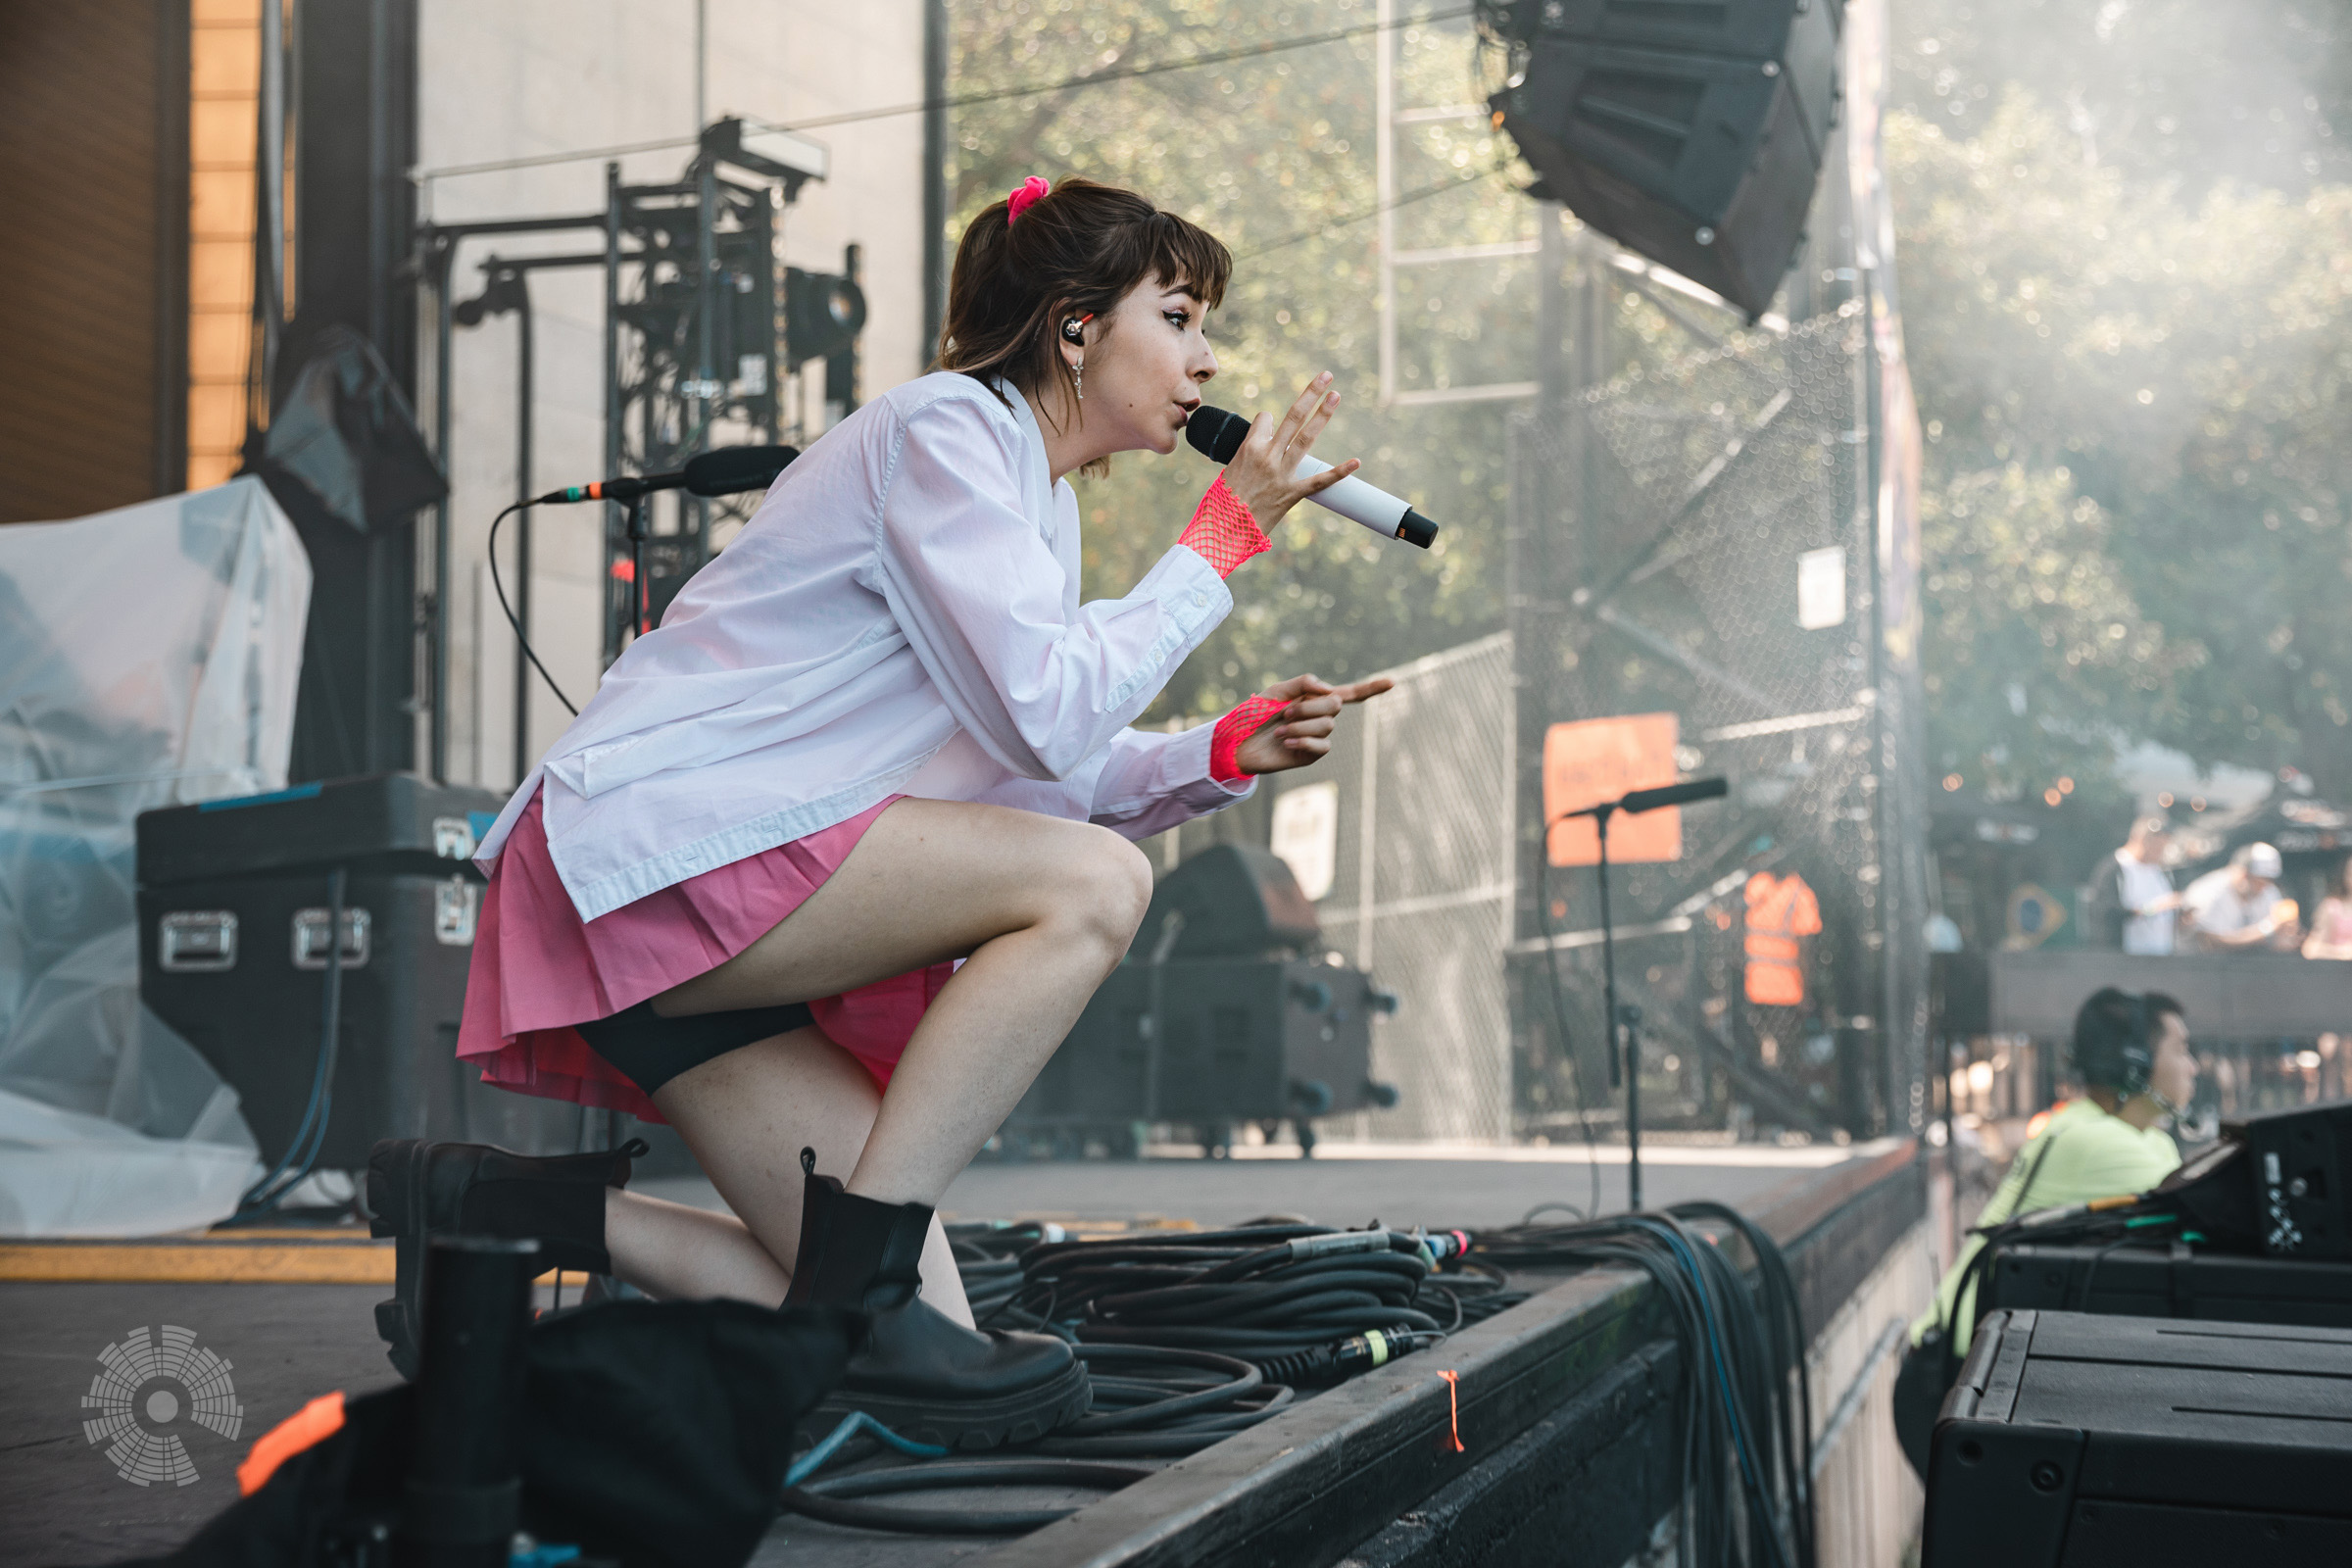 The Regrettes at Lollapalooza 2022